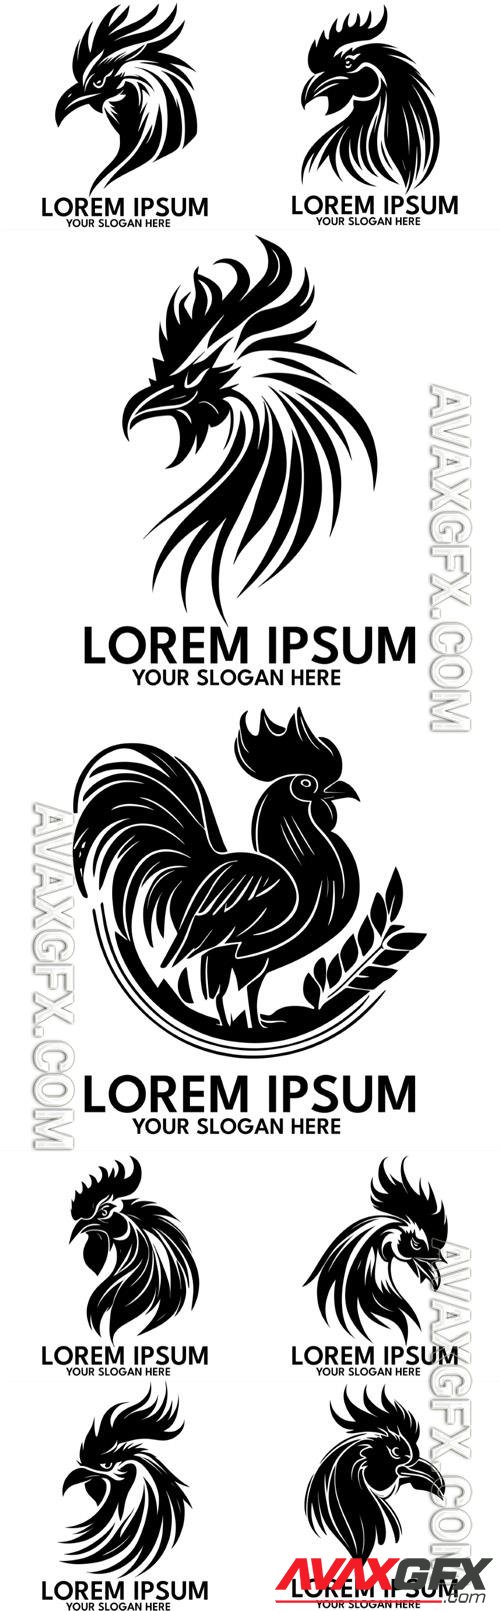 Rooster silhouette logo style vector illustration [EPS]